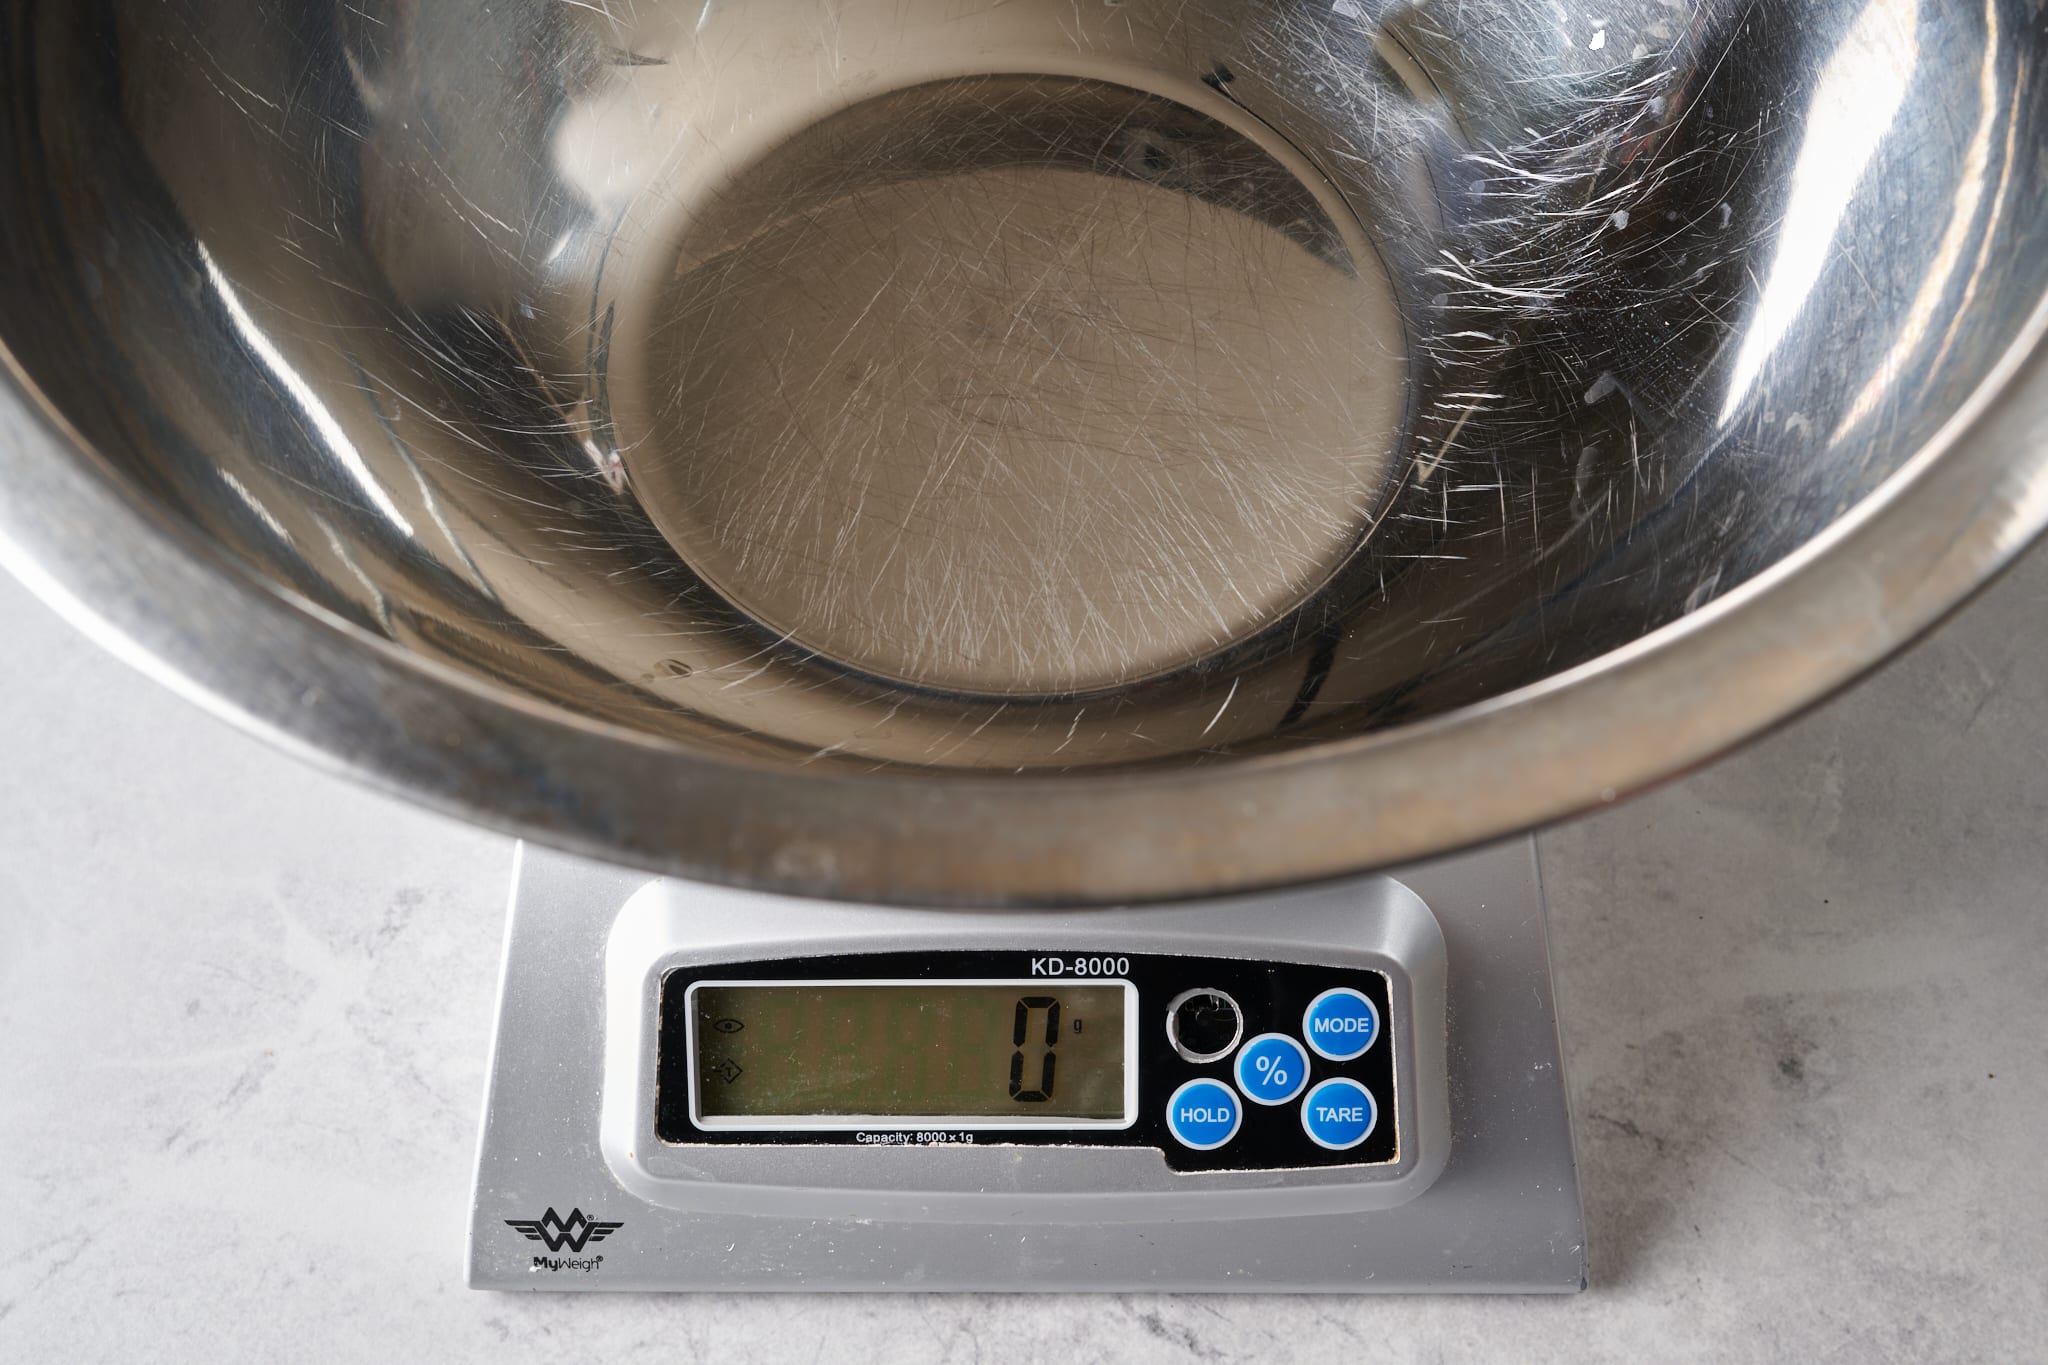 https://www.theperfectloaf.com/wp-content/uploads/2023/01/theperfectloaf_best_kitchen_scale_for_making_bread-9.jpg